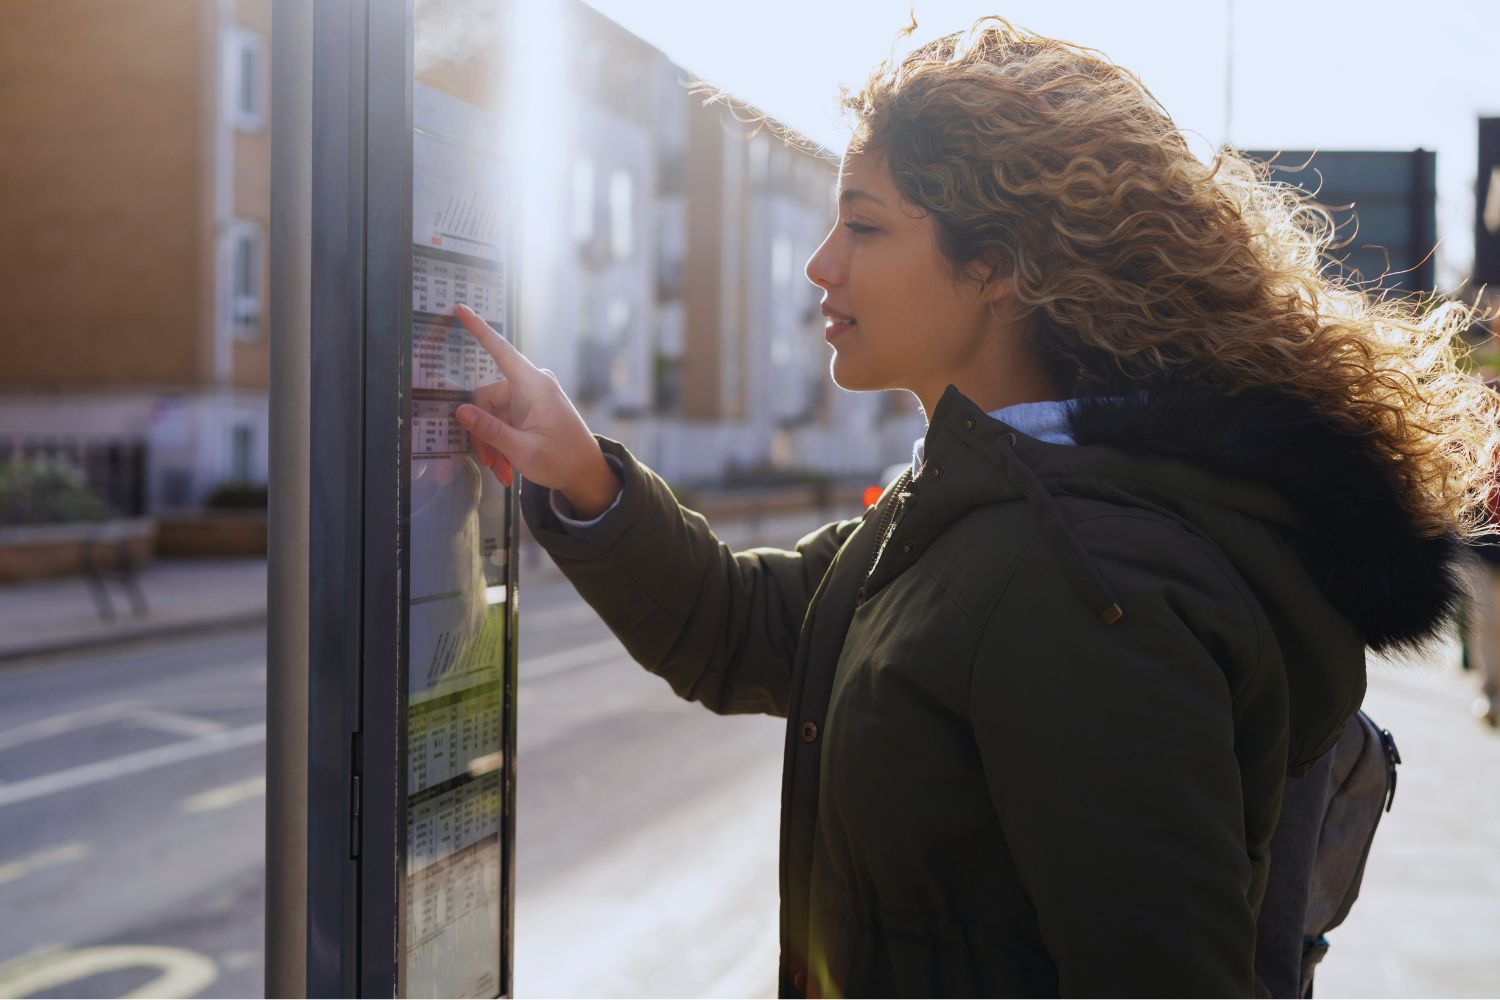 A young woman in a winter coat reviews a schedule at a bus stop